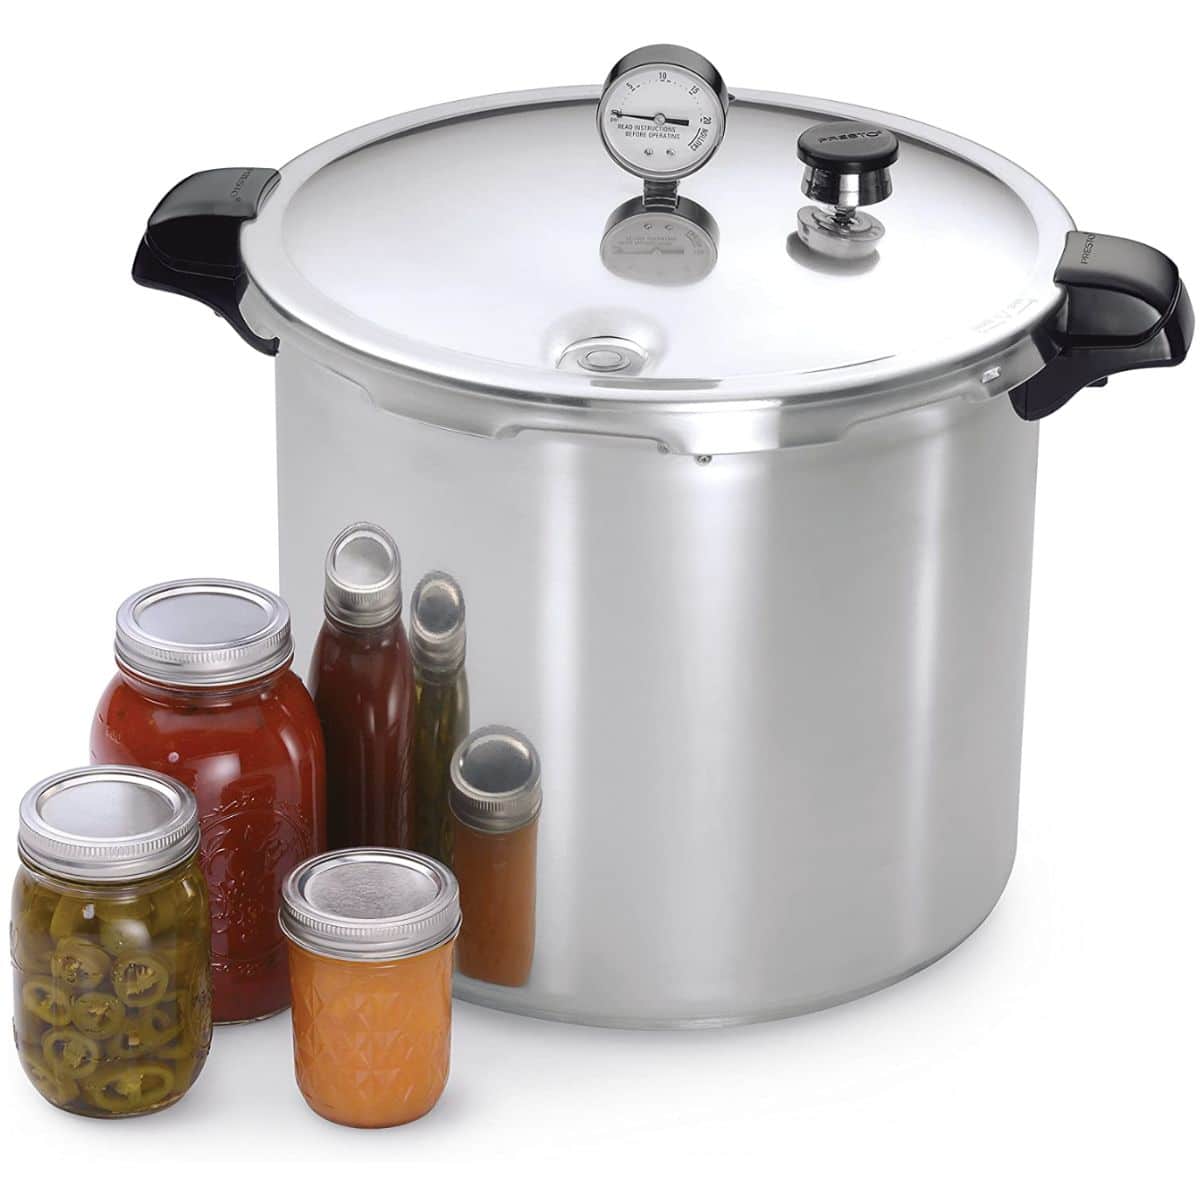 Best electric pressure canner